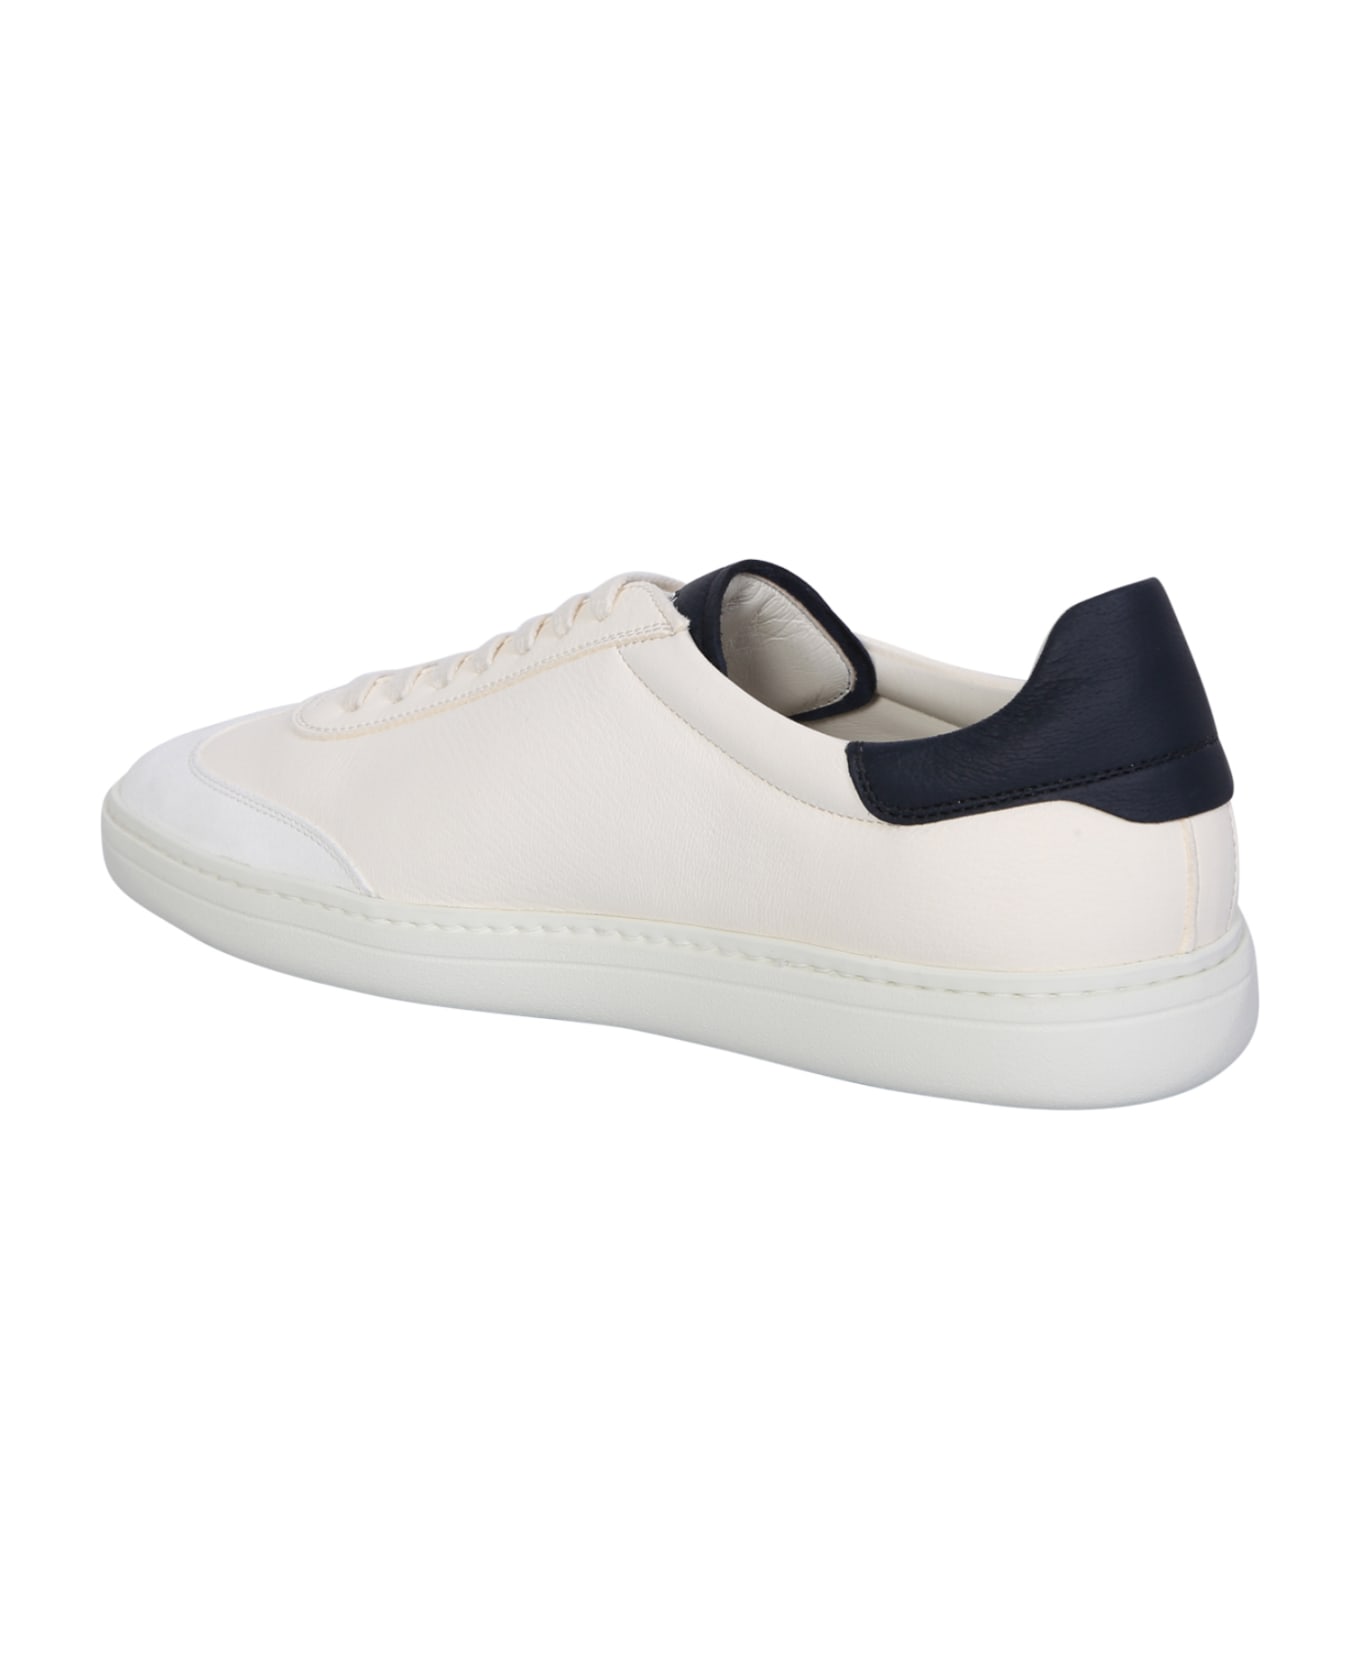 Church's Ivory Boland 2 Sneakers - Ivory